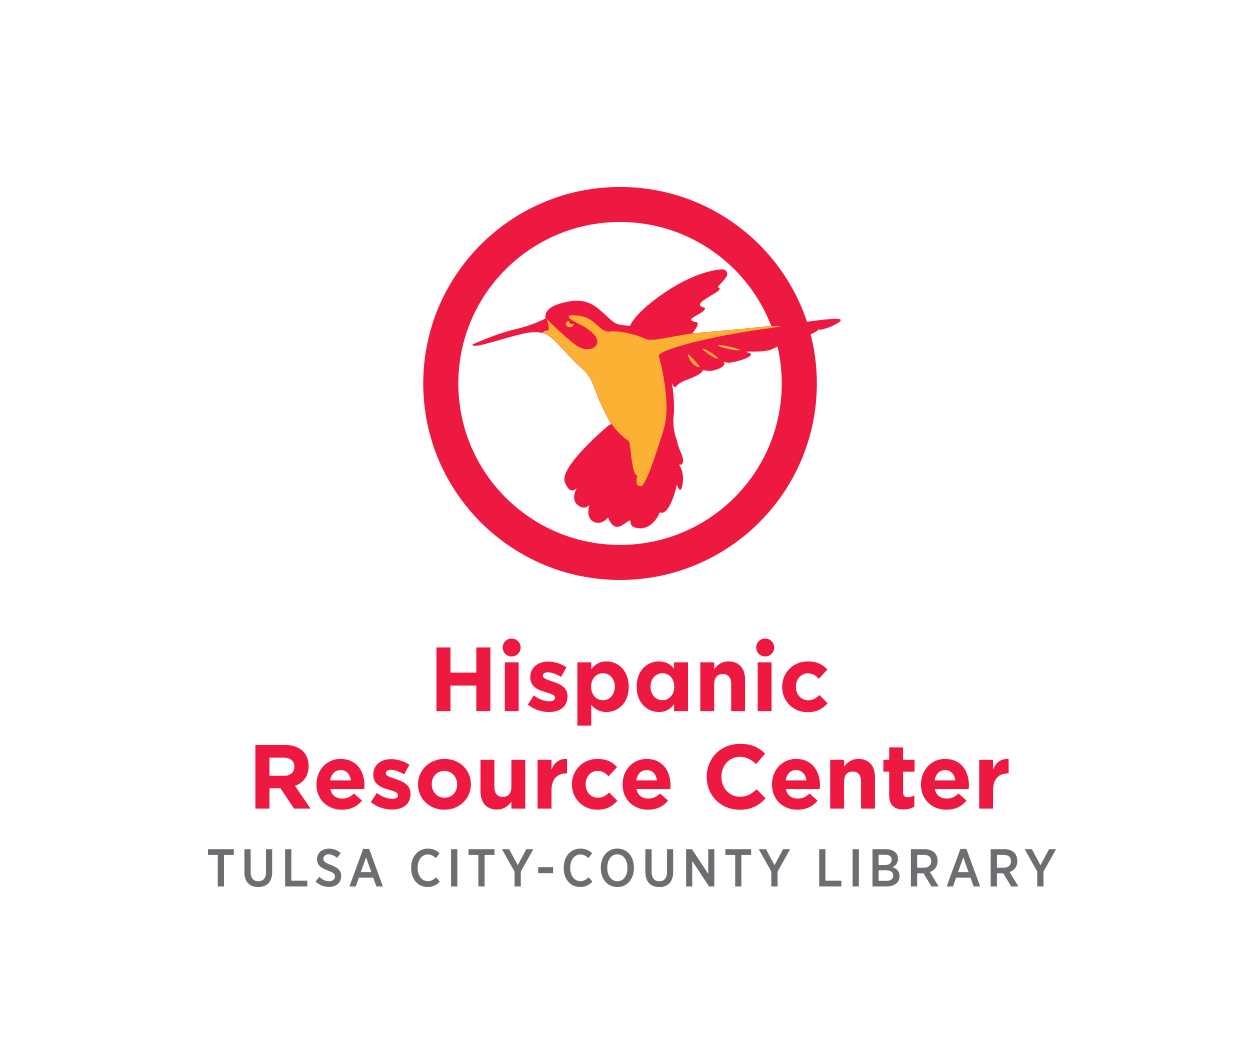 Logo for the Hispanic Resource Center at Tulsa City-County Library